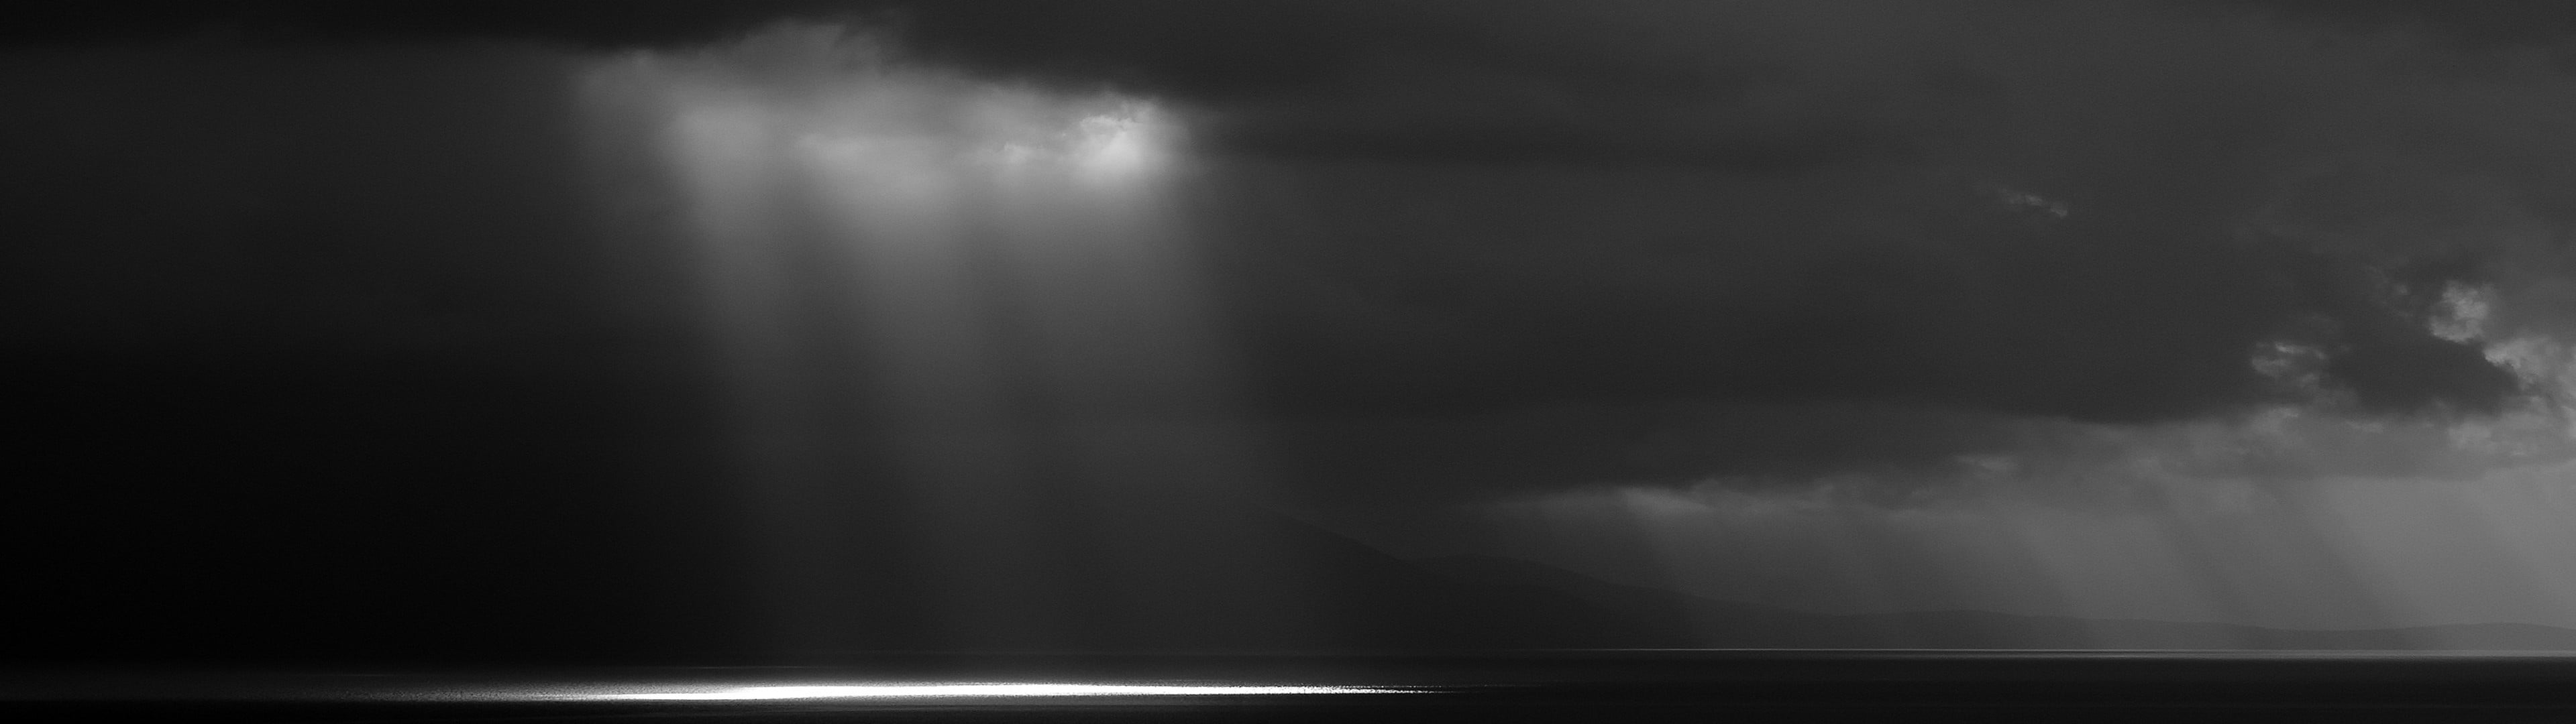 grayscale photo of sunlight peeking from body of clouds